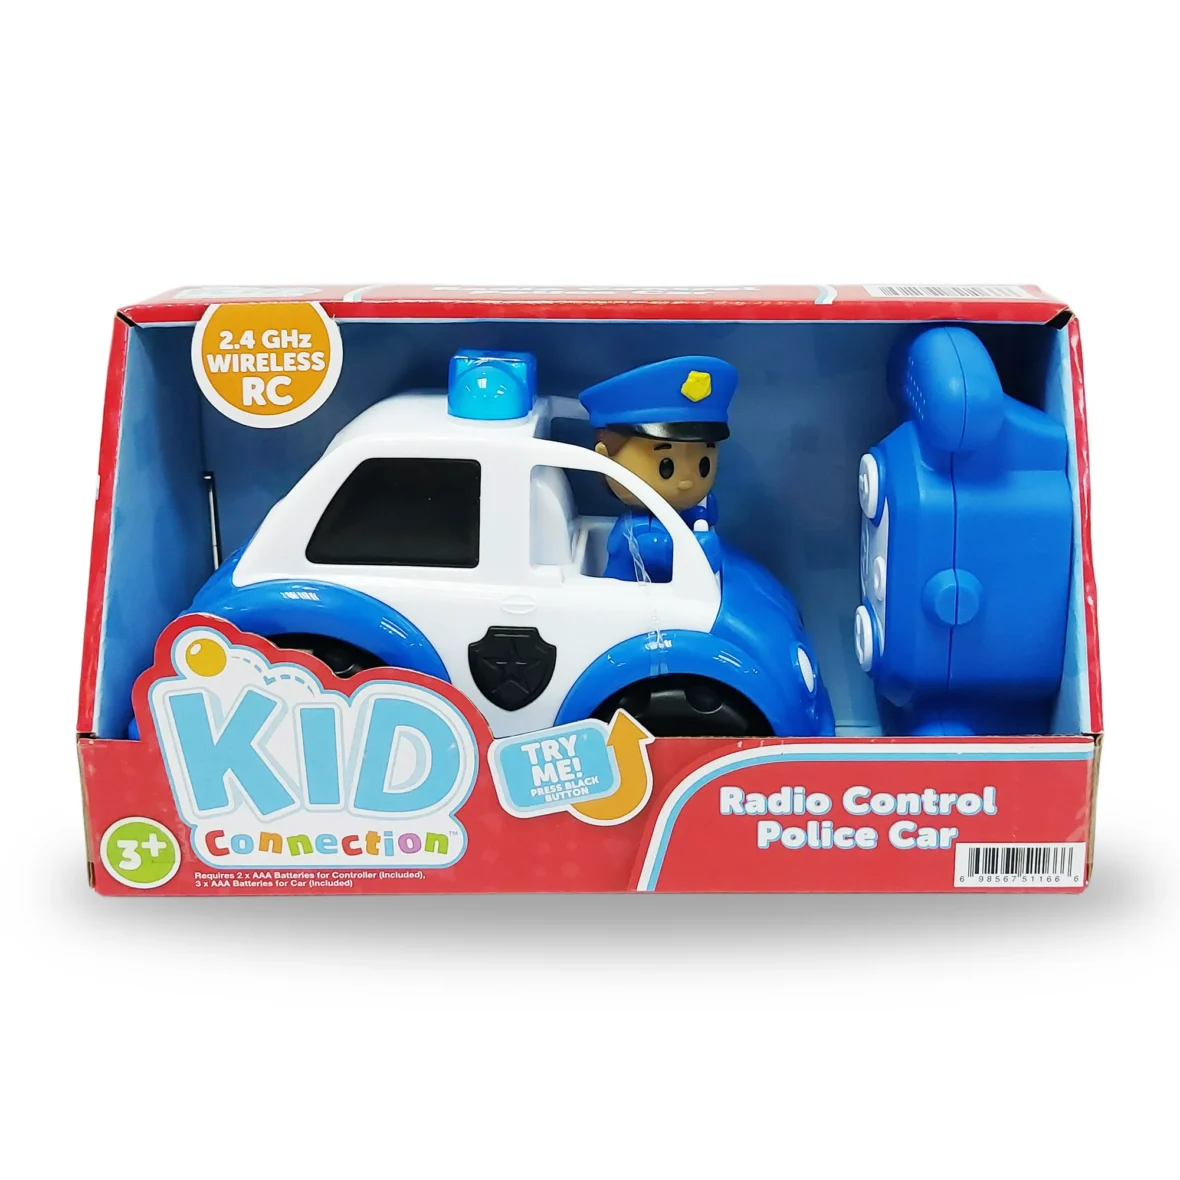 Kid Connection RC Police Car with Lights and Police Officer Figure, 2.4G